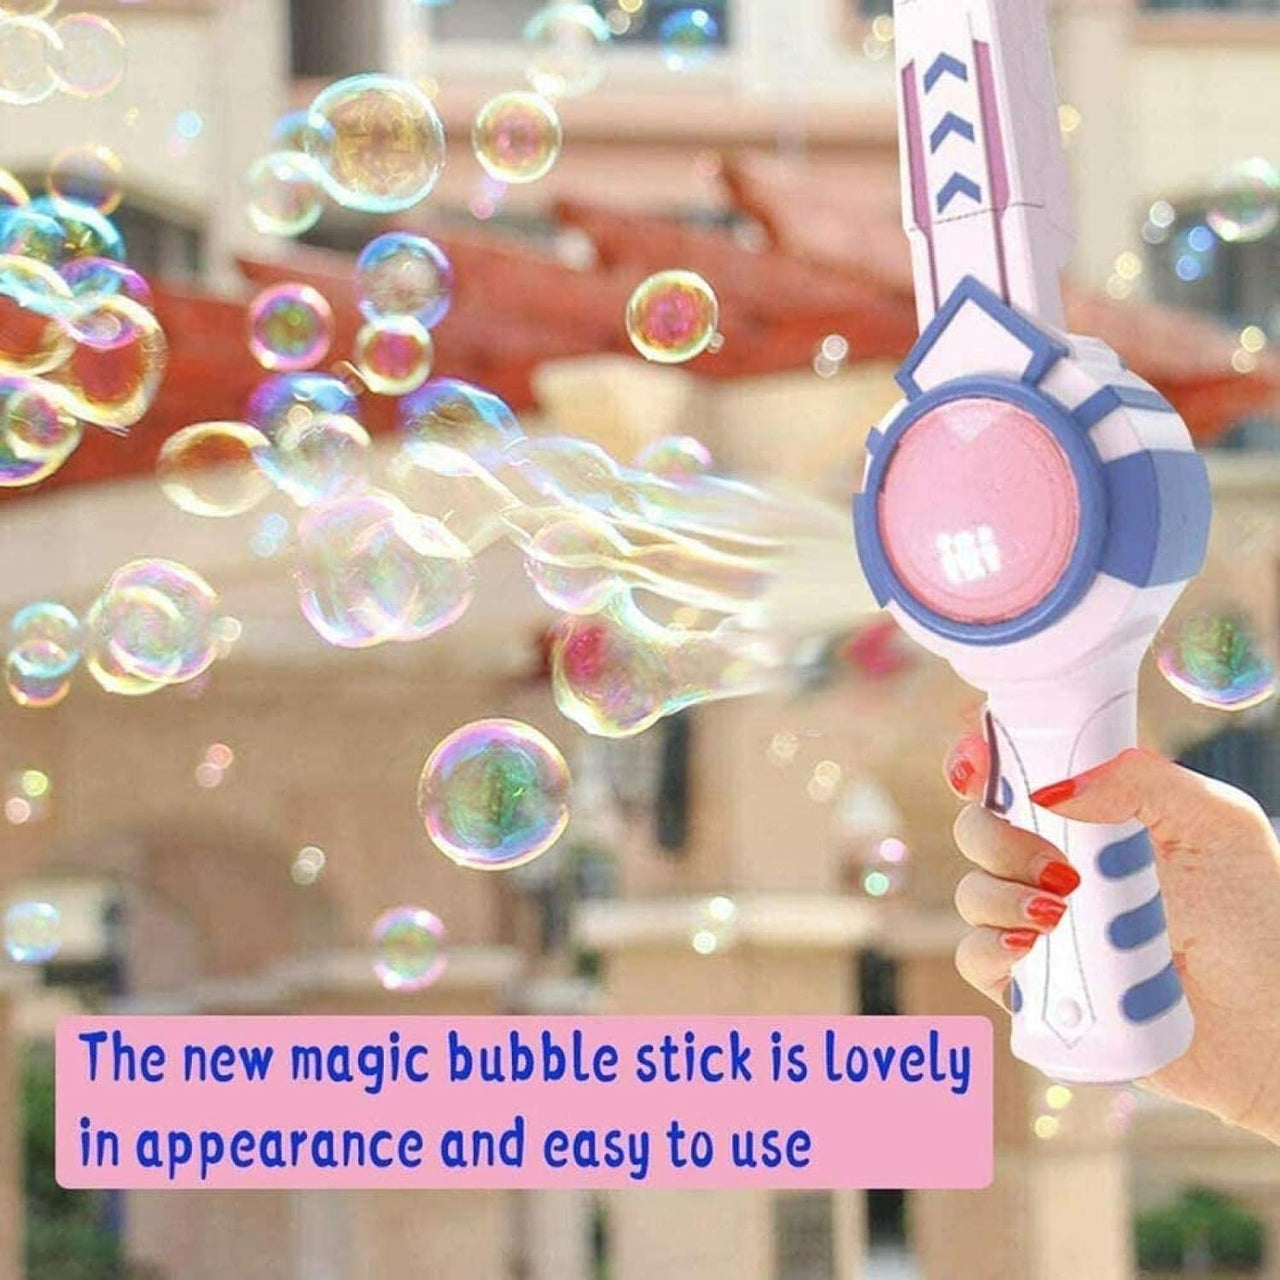 Bubble Blowing Stick with Elastic Smoke Bubble